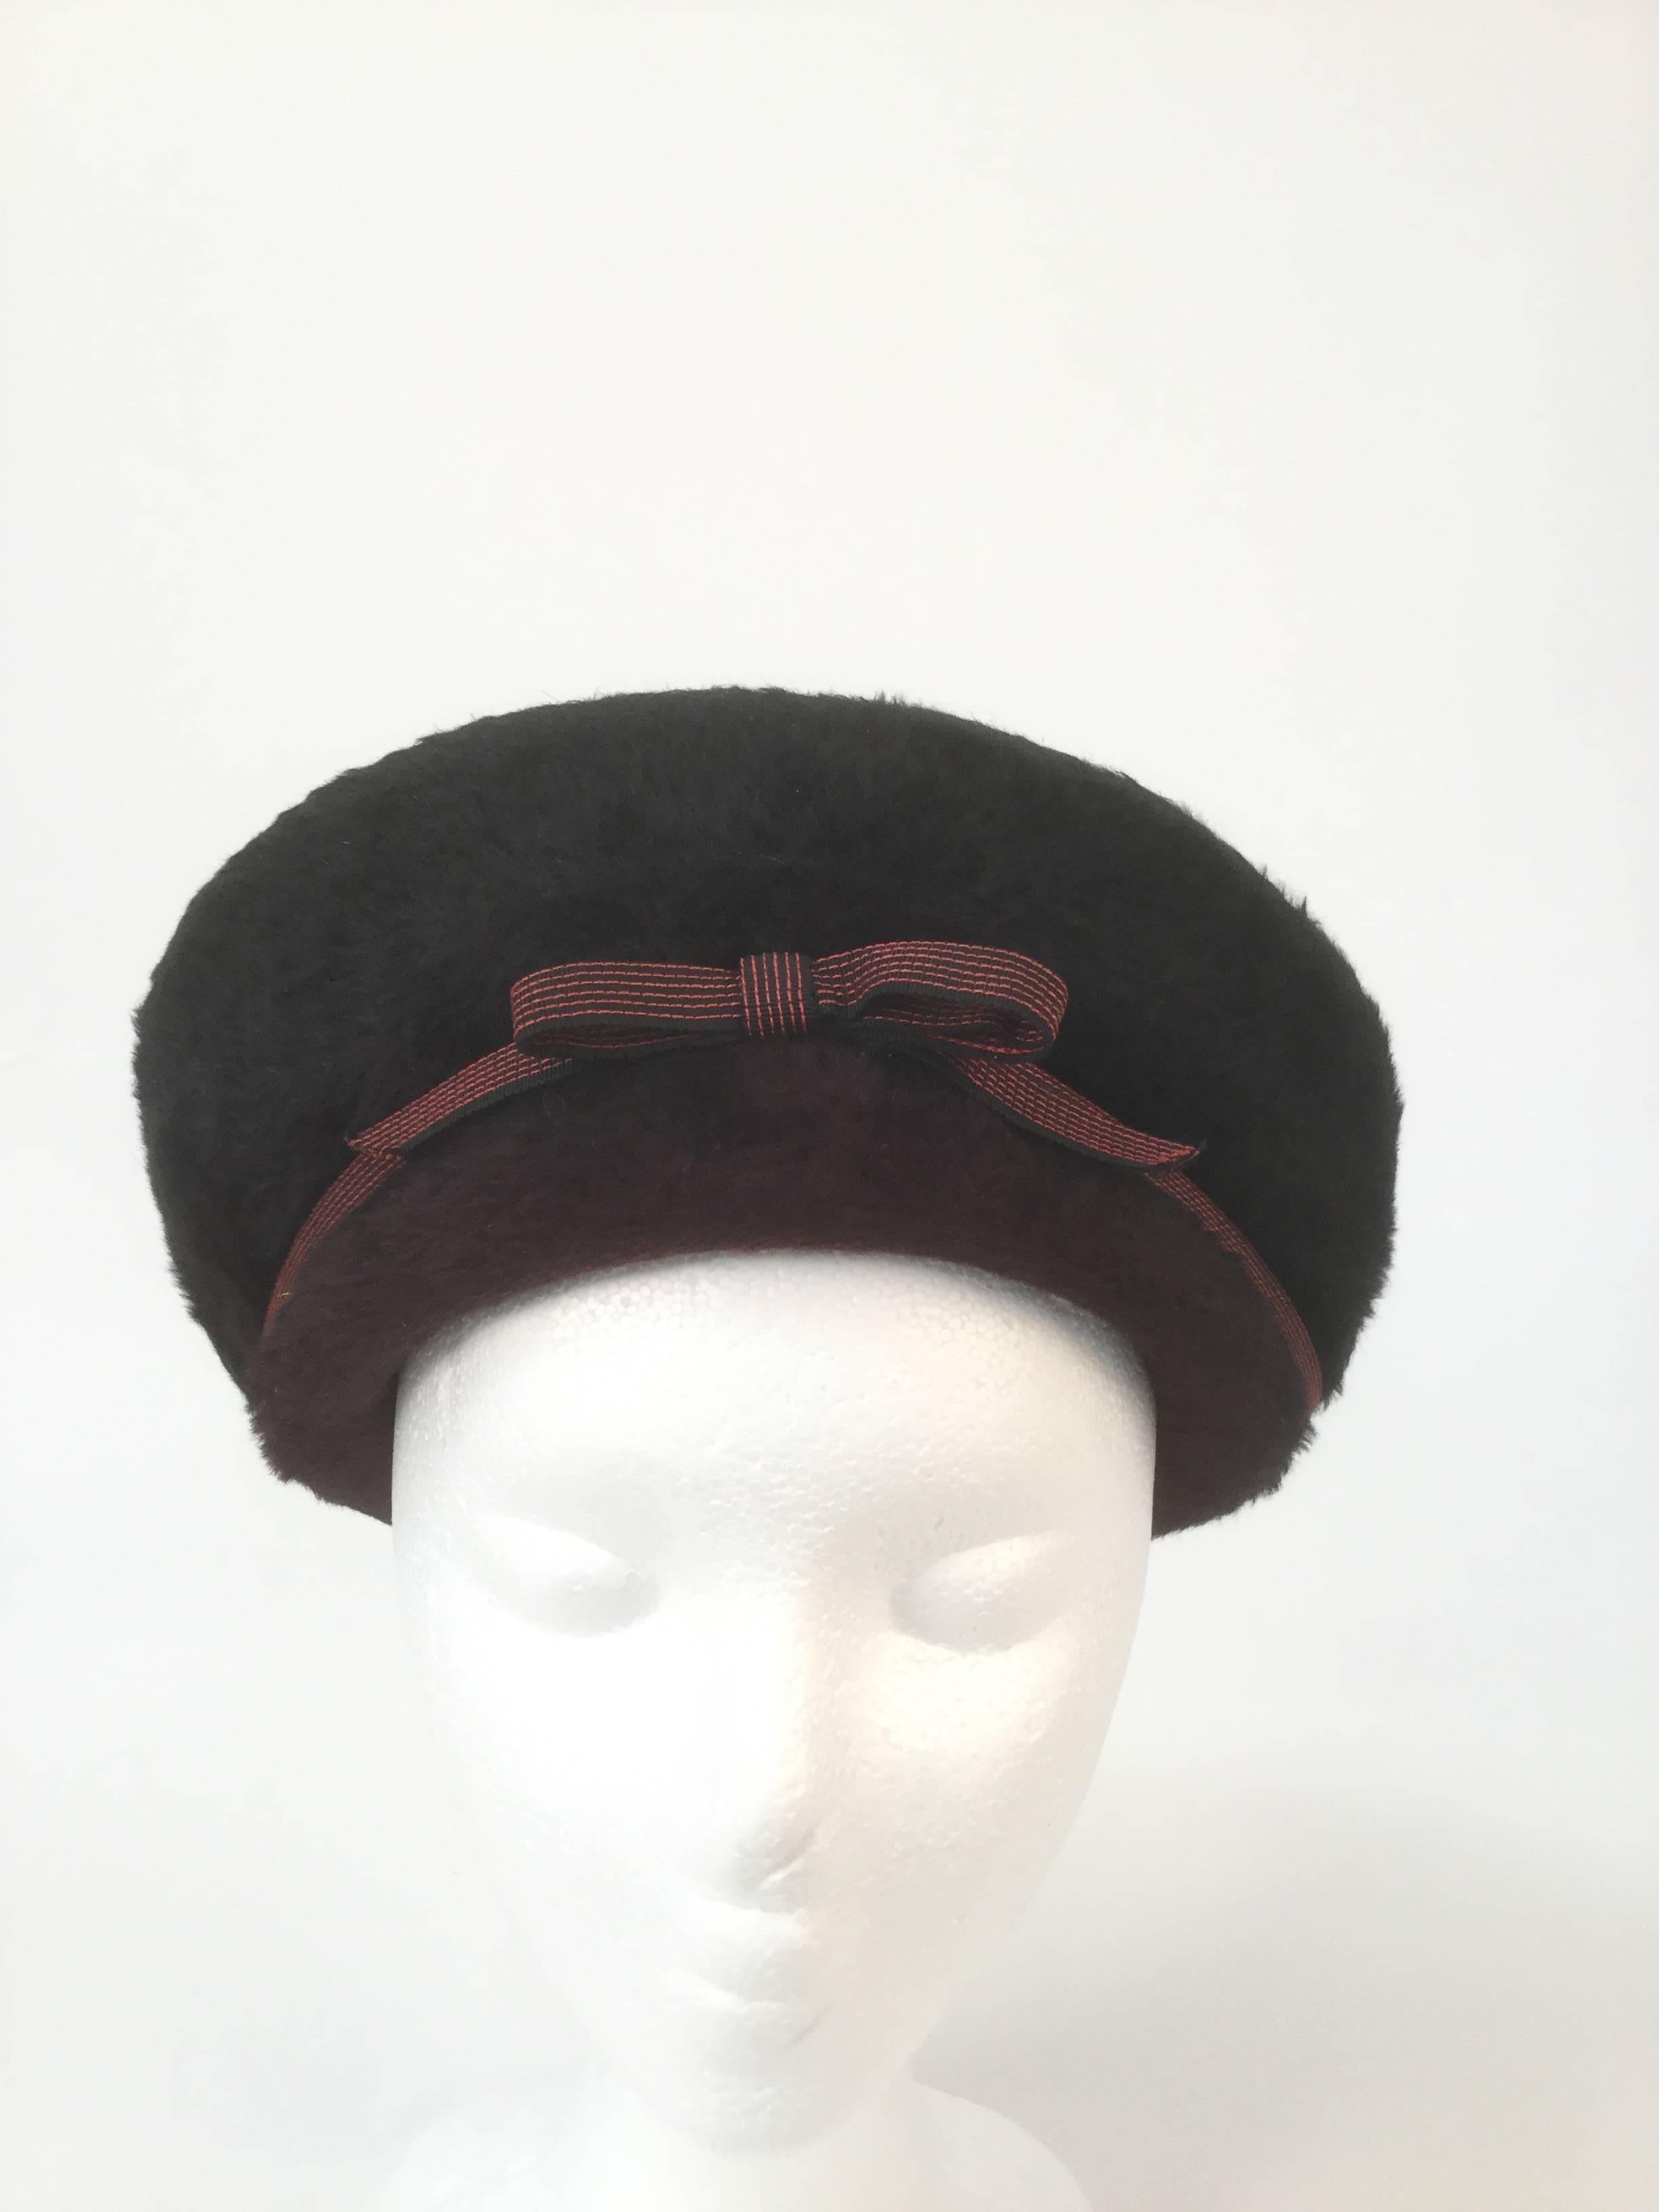 
Striking red and black felt hat by Elsa Schiaparelli! This structured hat has aristocratic eastern influences, resembling a cossack hat, a Manchurian hat, and a Qing dynasty winter court official hat! The hat has a black upturned brim that rises